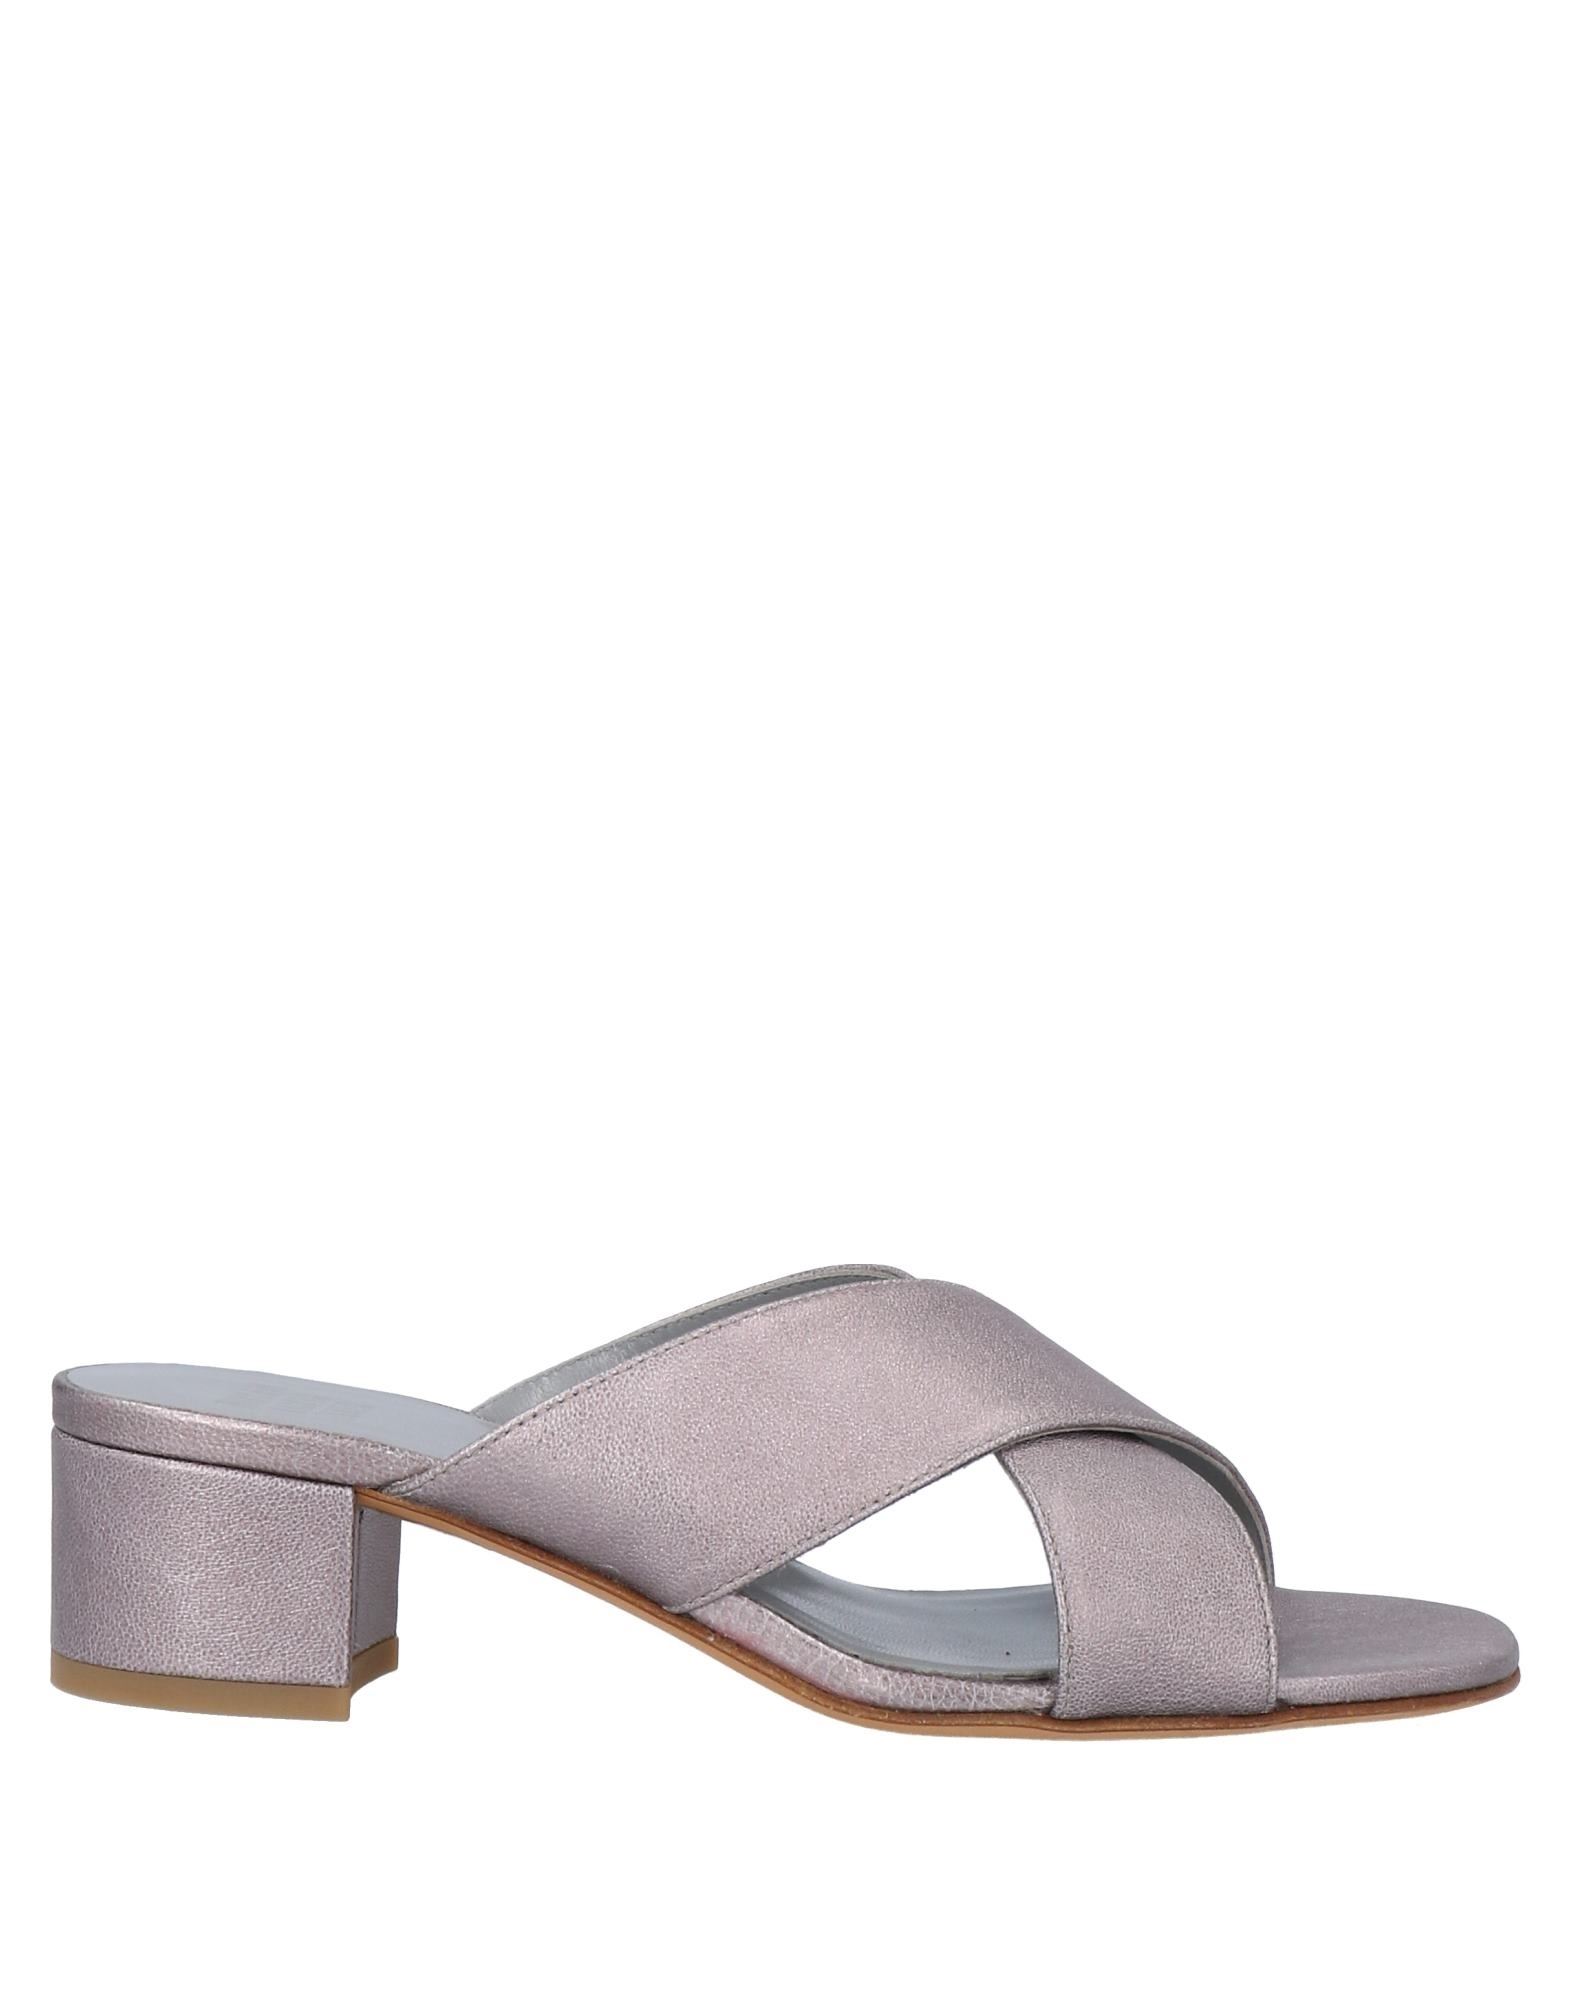 Maryam Nassir Zadeh Sandals In Lilac